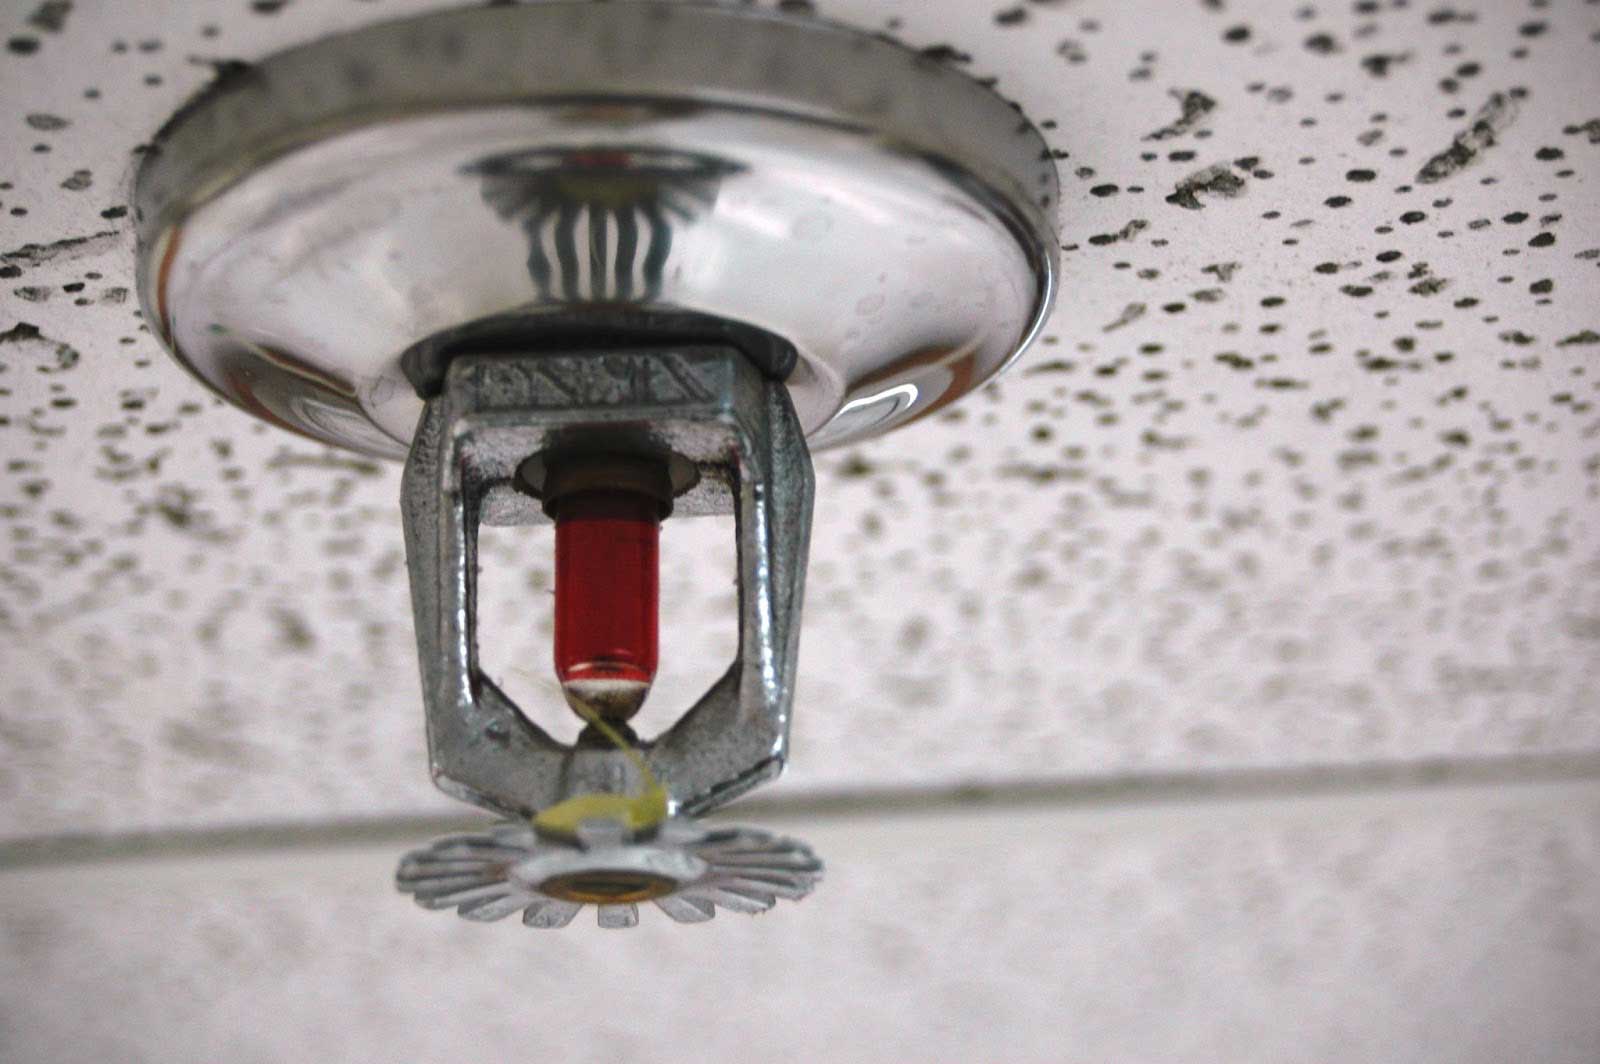 What Are The Fire Sprinkler System Code Requirements For Commercial Buildings?